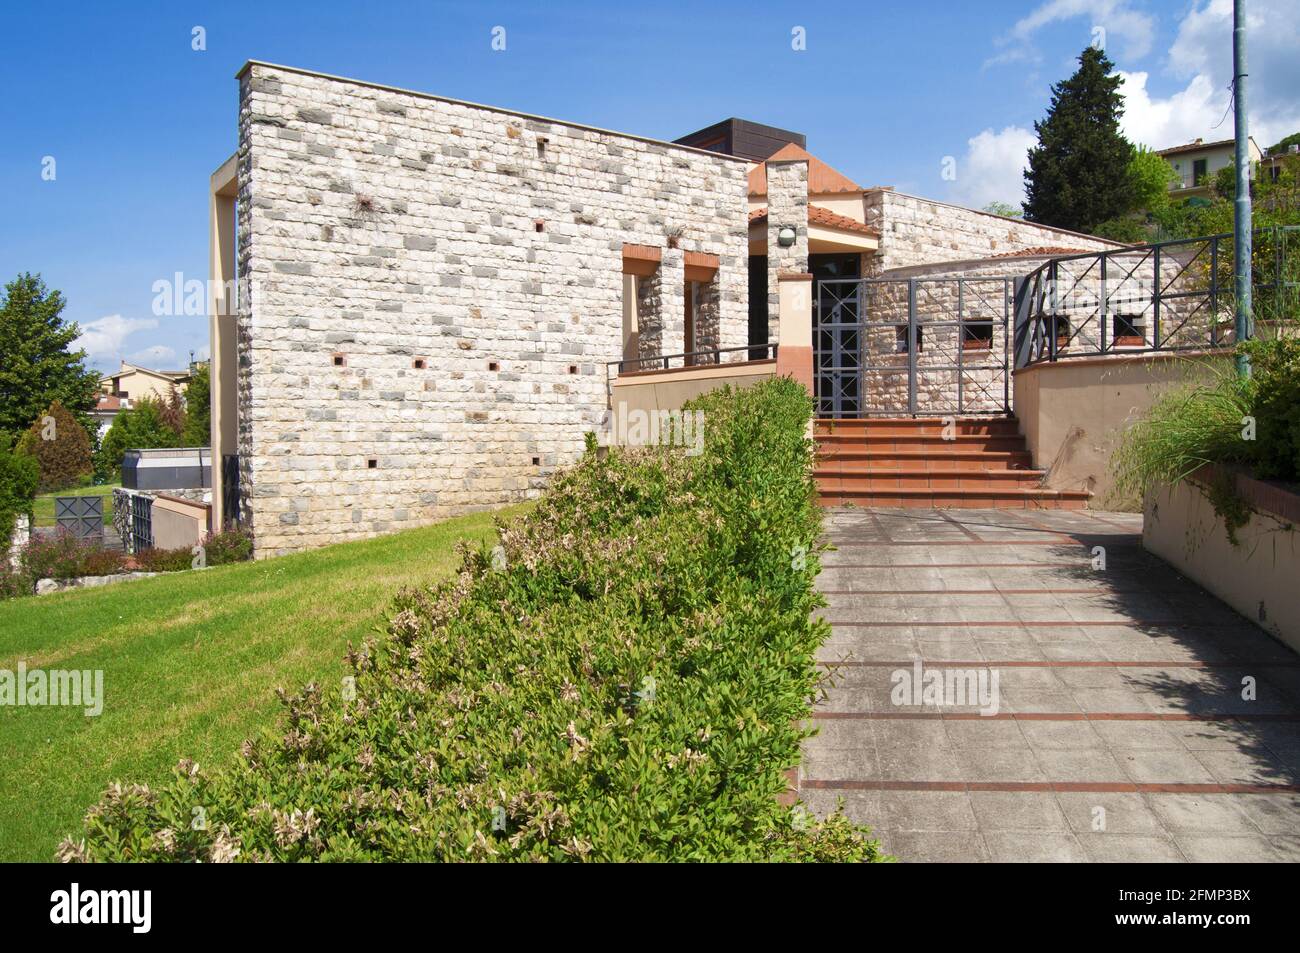 Bagno a Ripoli, Florence, Tuscany, Italy - Kingdom Hall for the meetings of Jehovah's Witnesses. Stock Photo